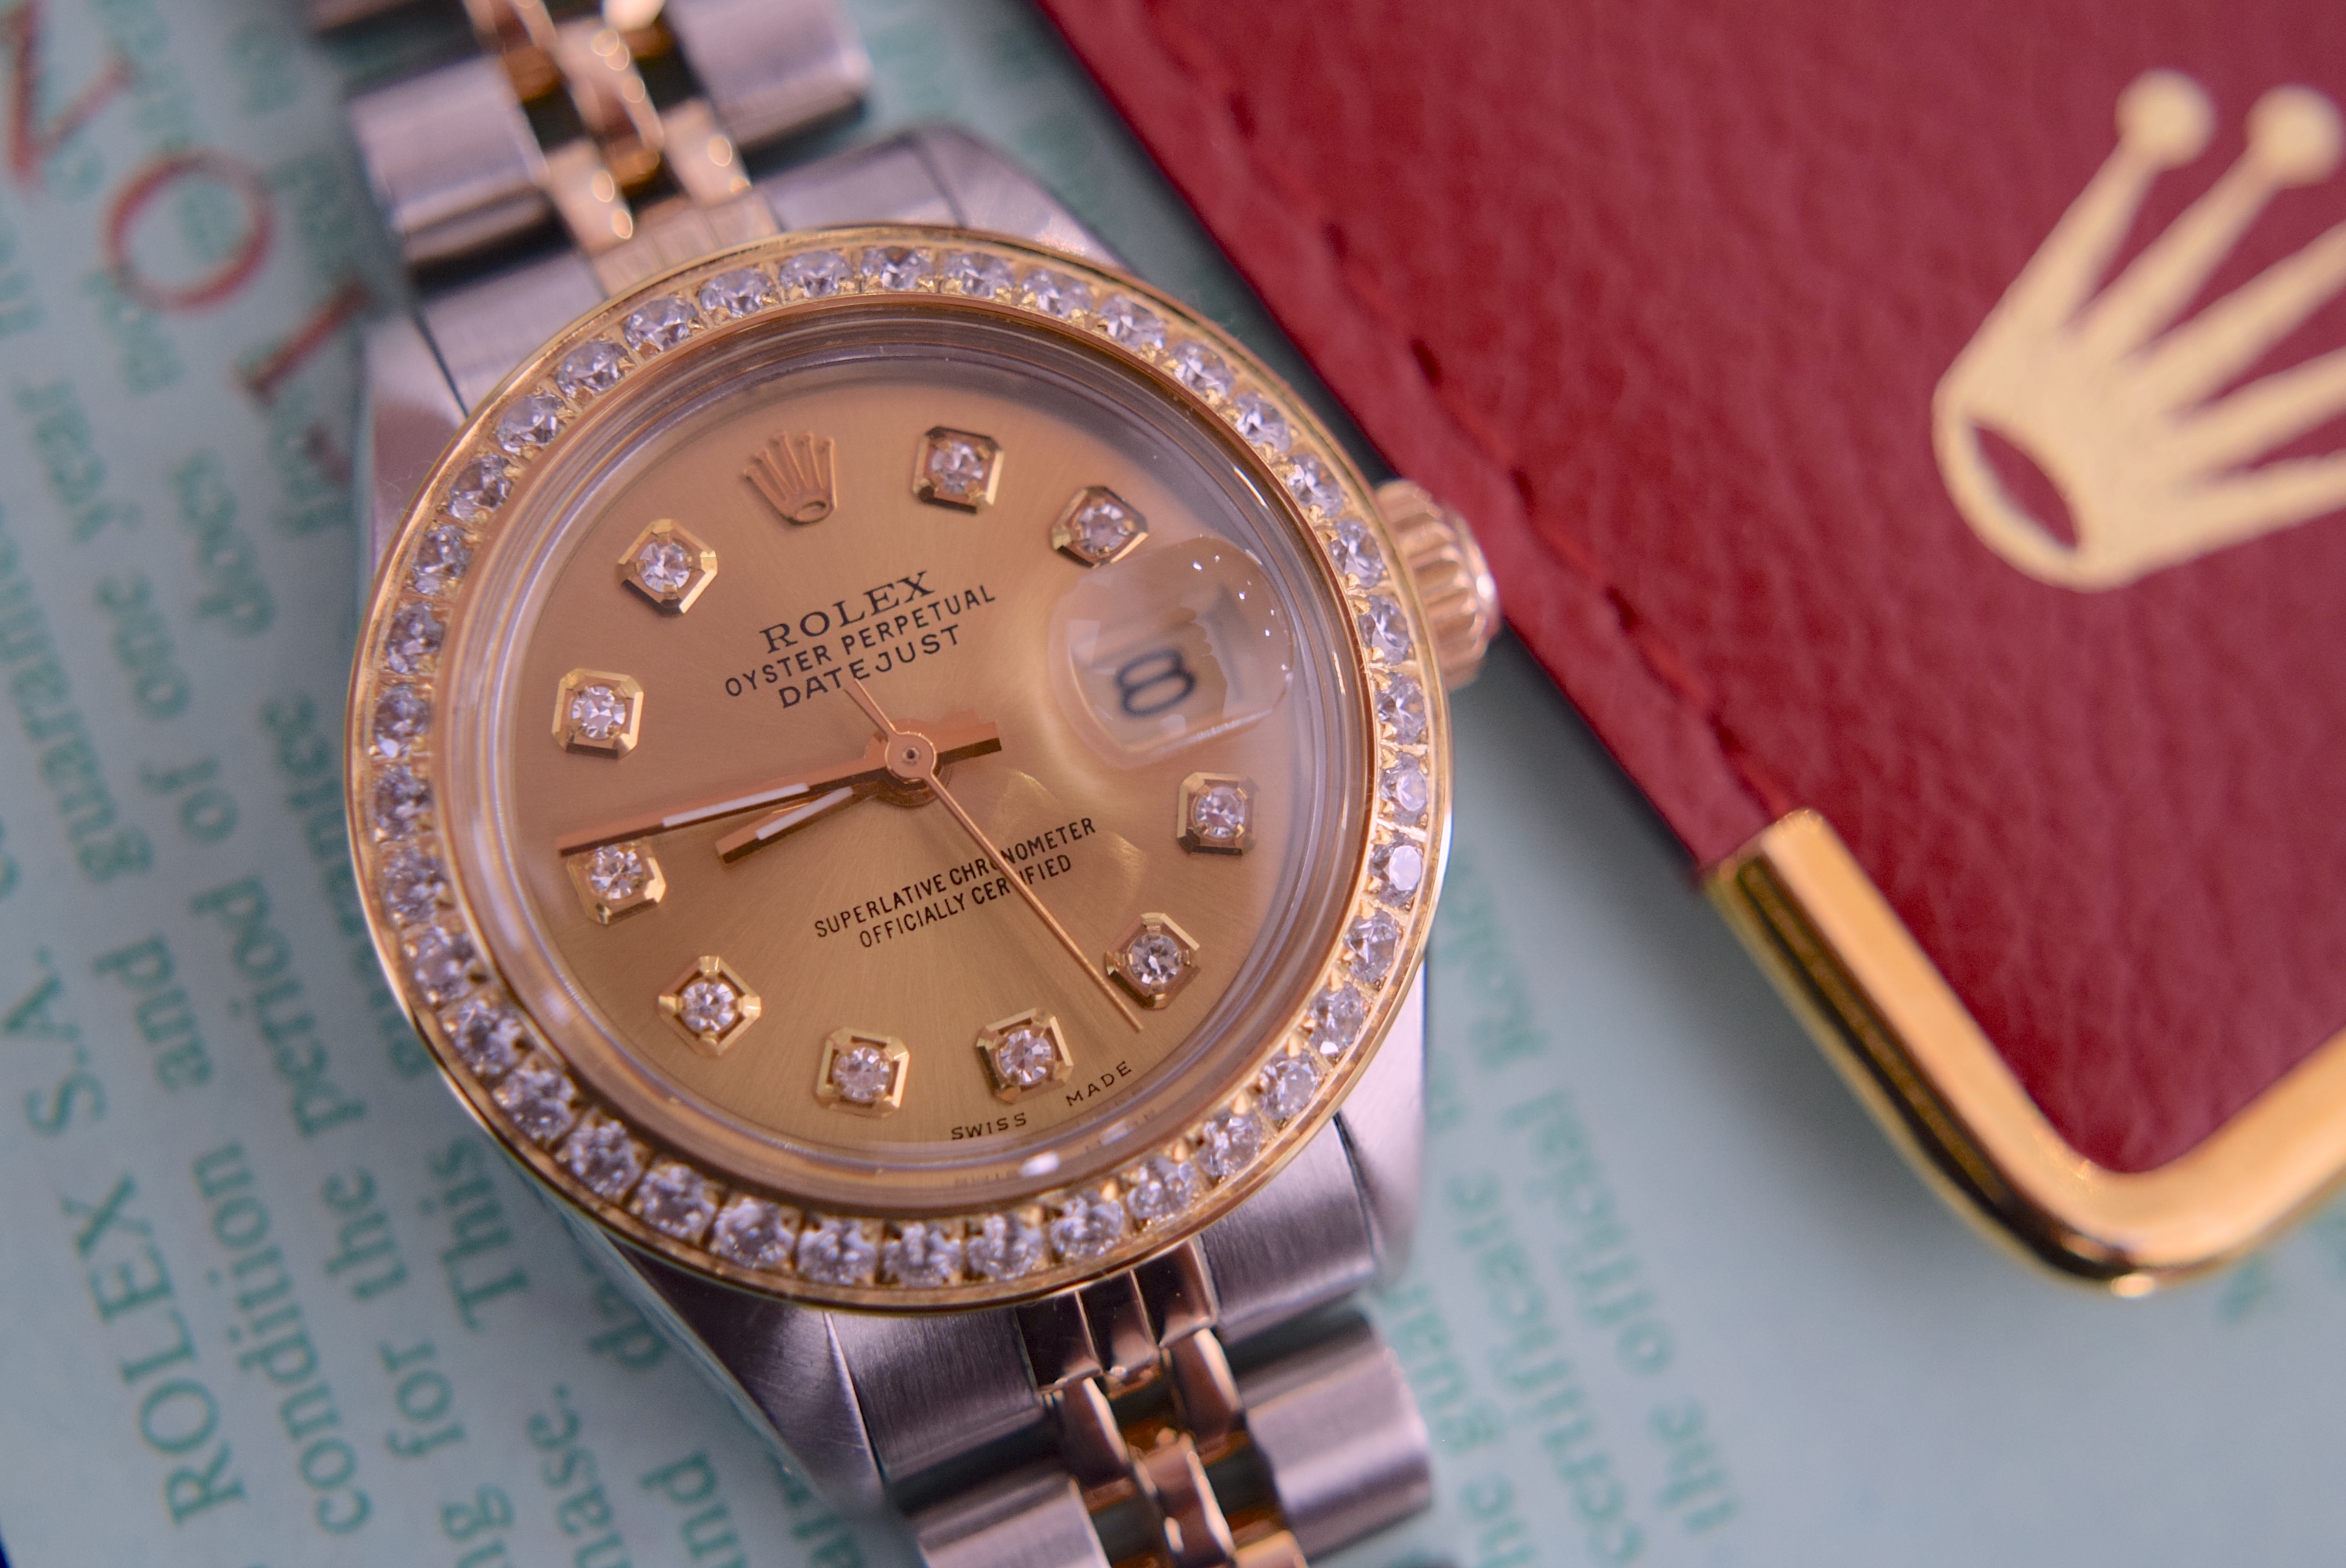 ROLEX 18CT YELLOW GOLD/ STEEL DATEJUST REF. 6917 - CUSTOM CHAMPAGNE DIAL/ BEZEL - Image 2 of 24